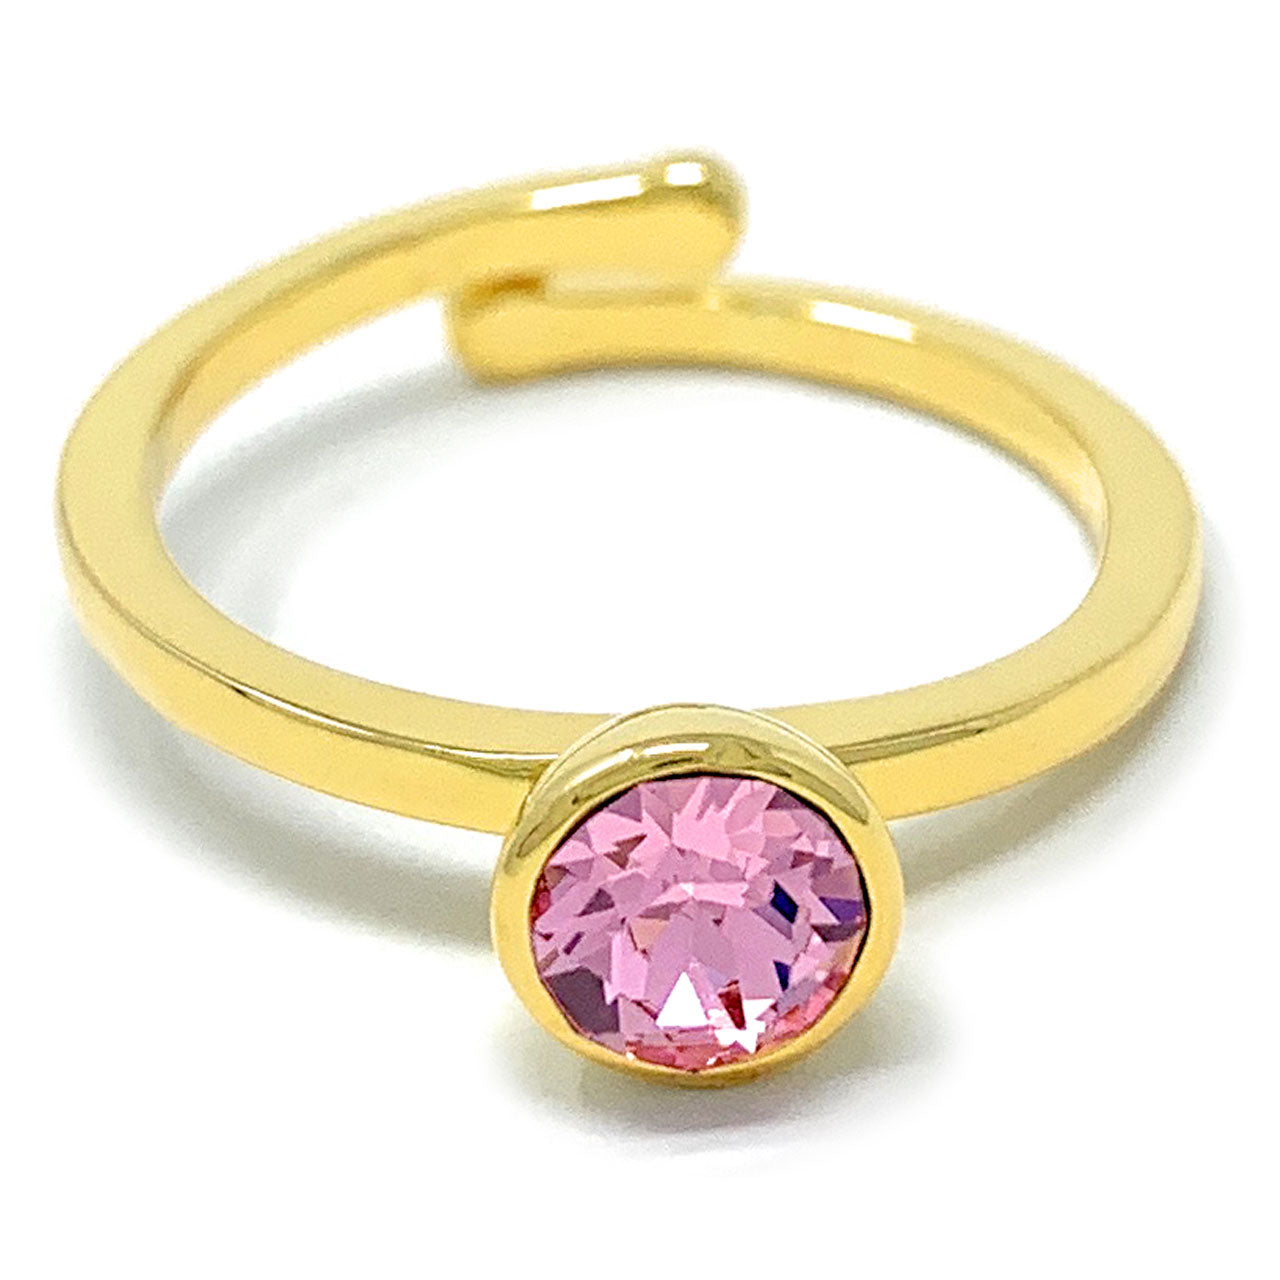 Harley Adjustable Ring with Pink Light Rose Round Crystals from Swarovski Gold Plated - Ed Heart